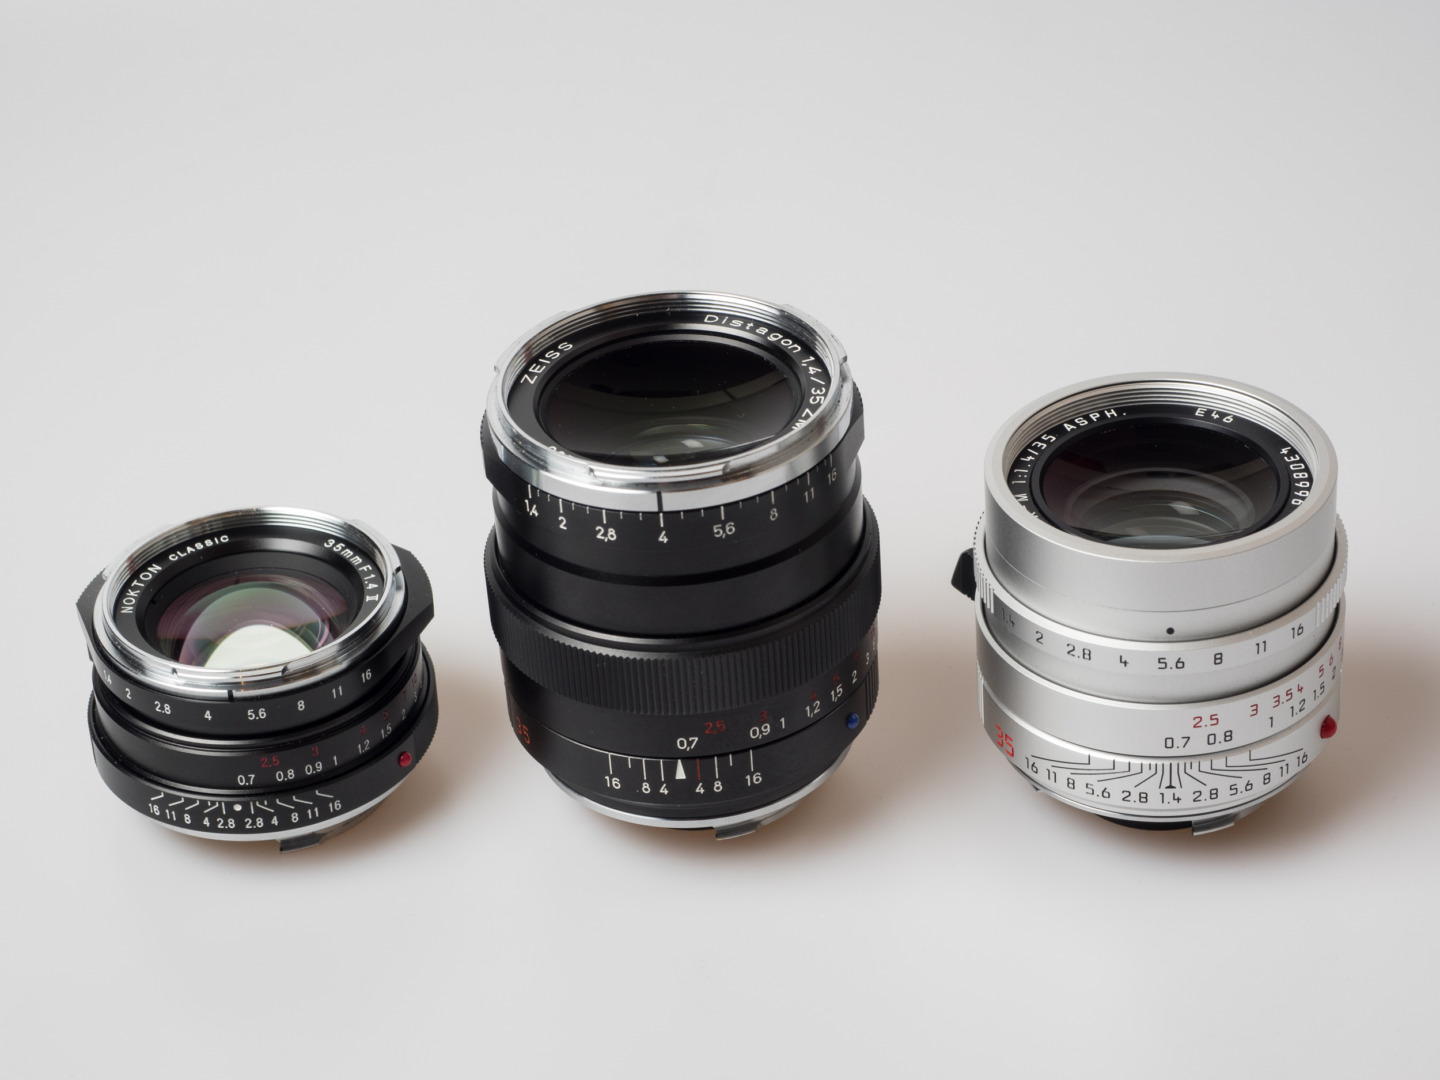 Compared with the tiny, old-Summilux-style Voigtländer (left) and also with the current Summilux FLE, the Distagon is quite massive.